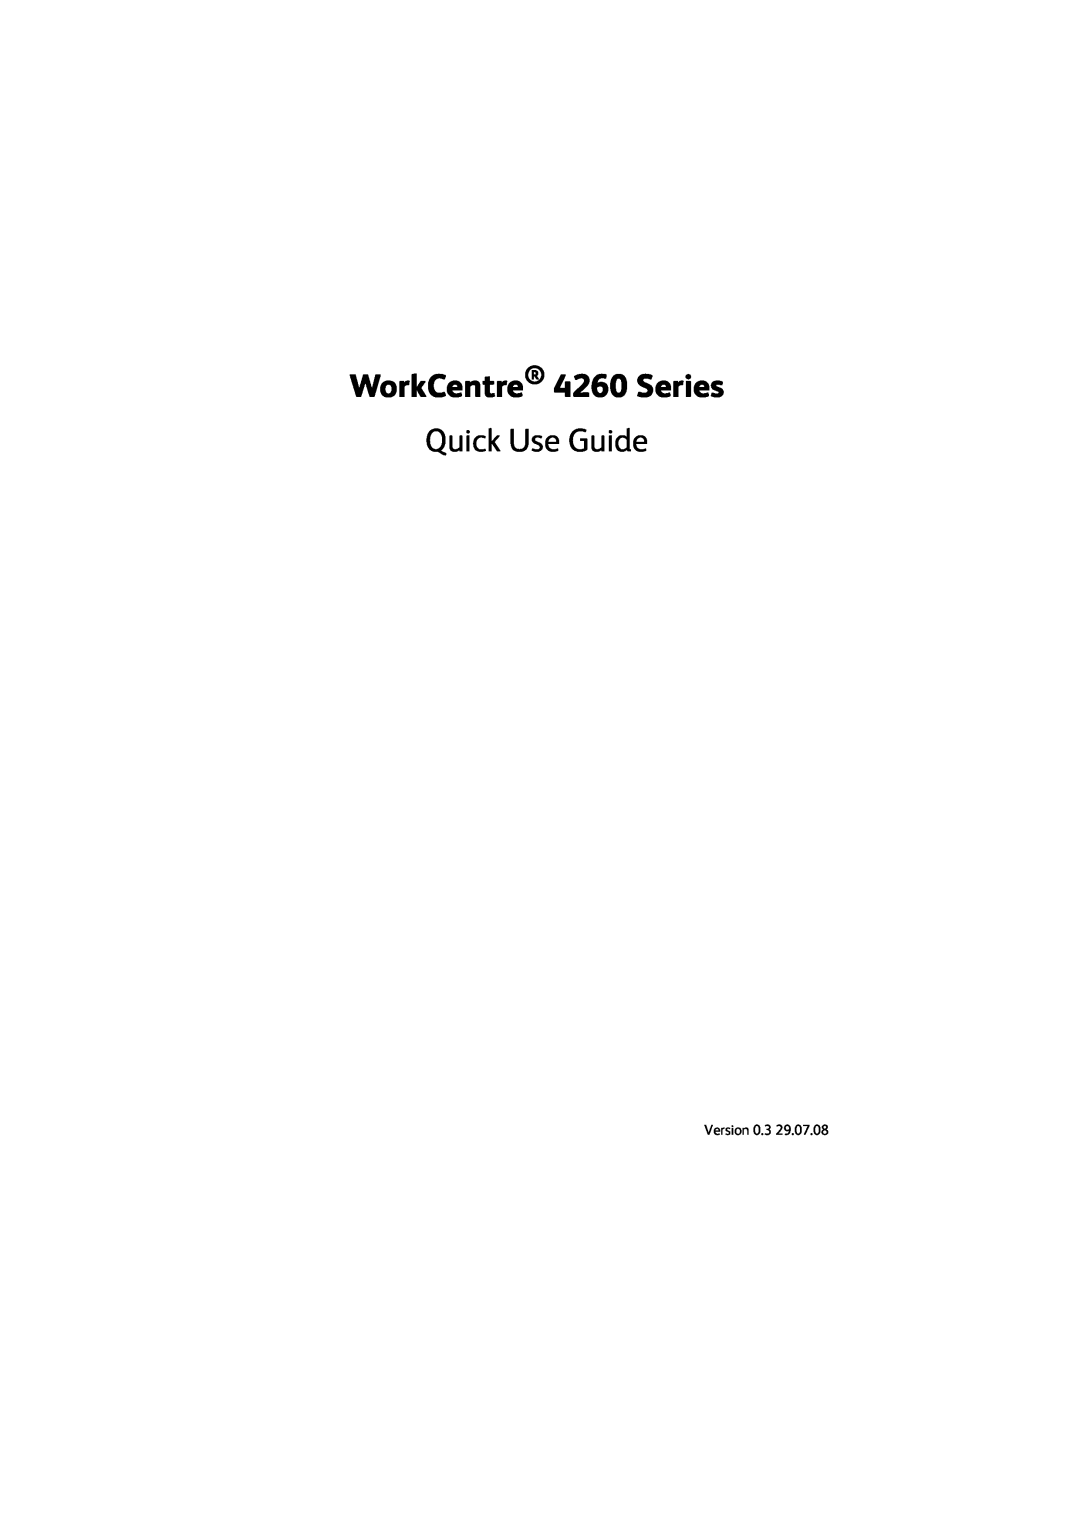 Xerox 4260C manual WorkCentre 4260 Series, Quick Use Guide 